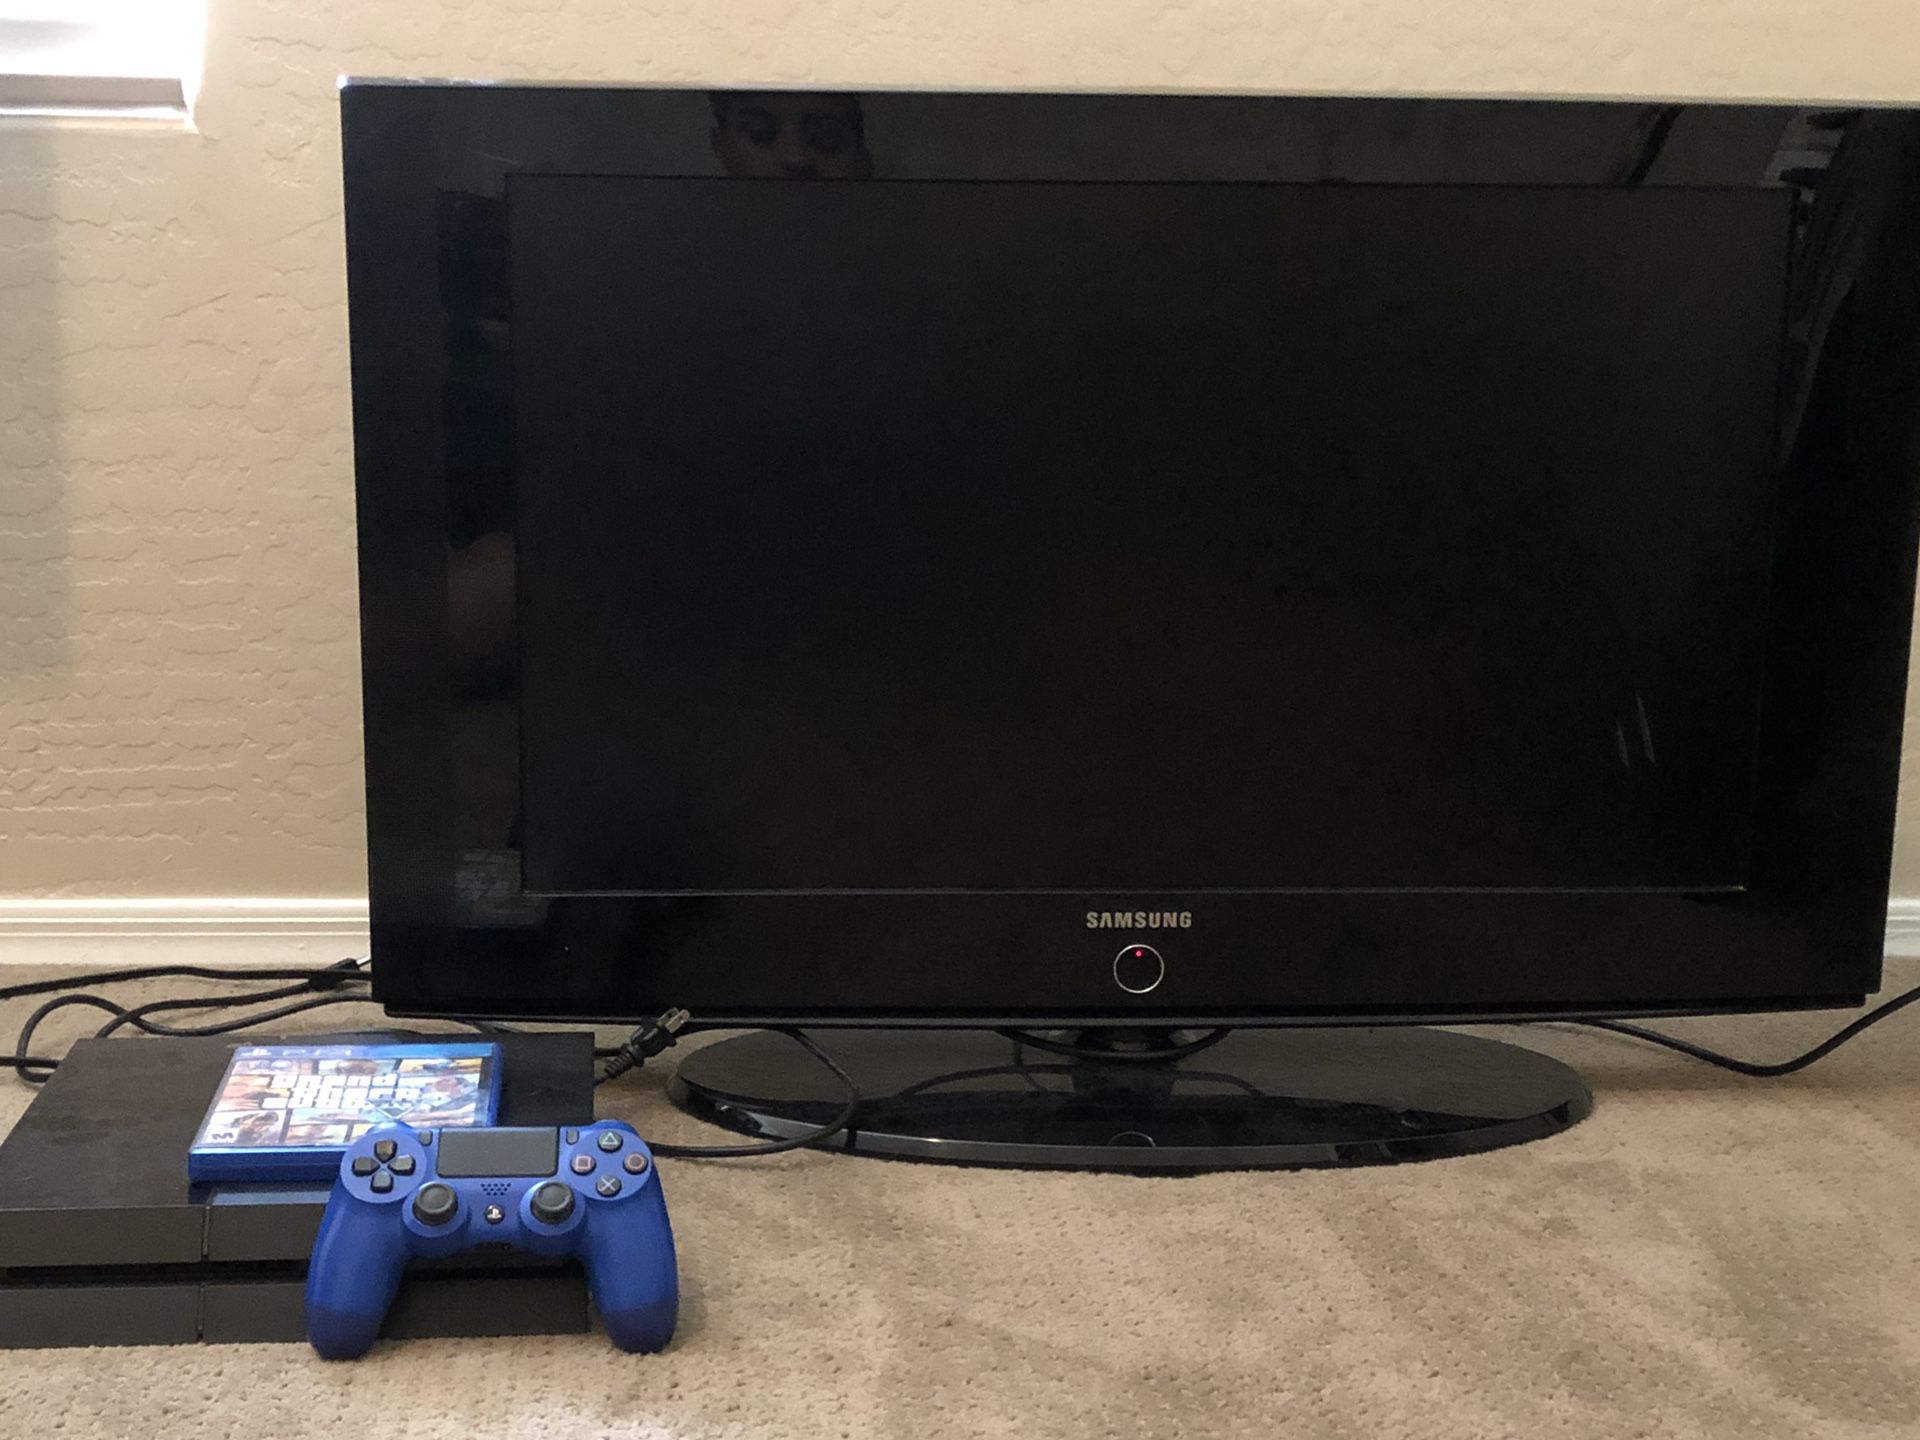 PS4 and Samsung TV